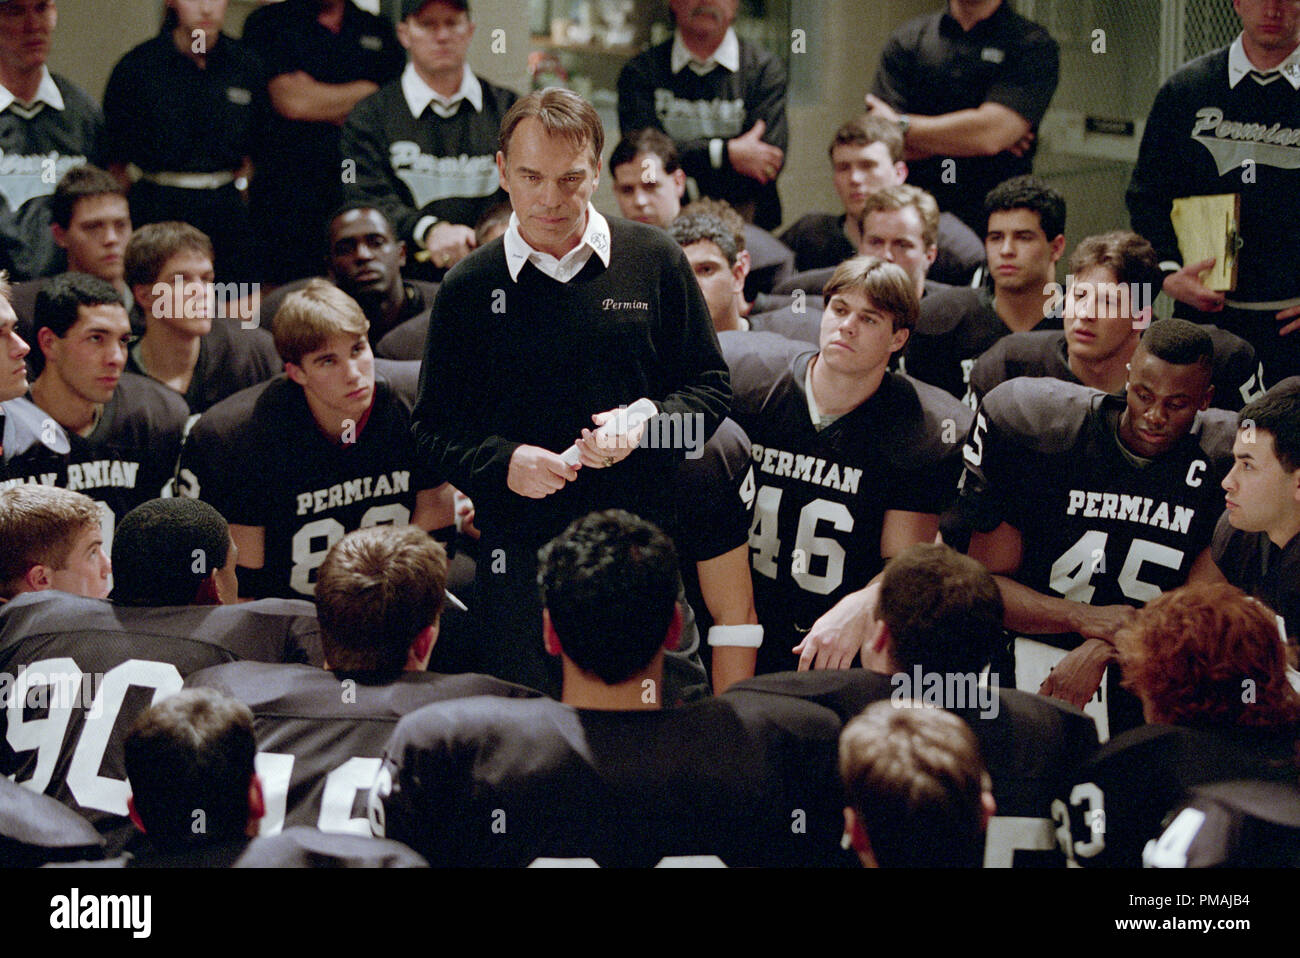 Coach Gary Gaines (BILLY BOB THORNTON) motivates his team in the locker room before a game in Imagine Entertainment's adaptation of H.G. Bissinger's prize-winning book, Friday Night Lights. (2004) Stock Photo